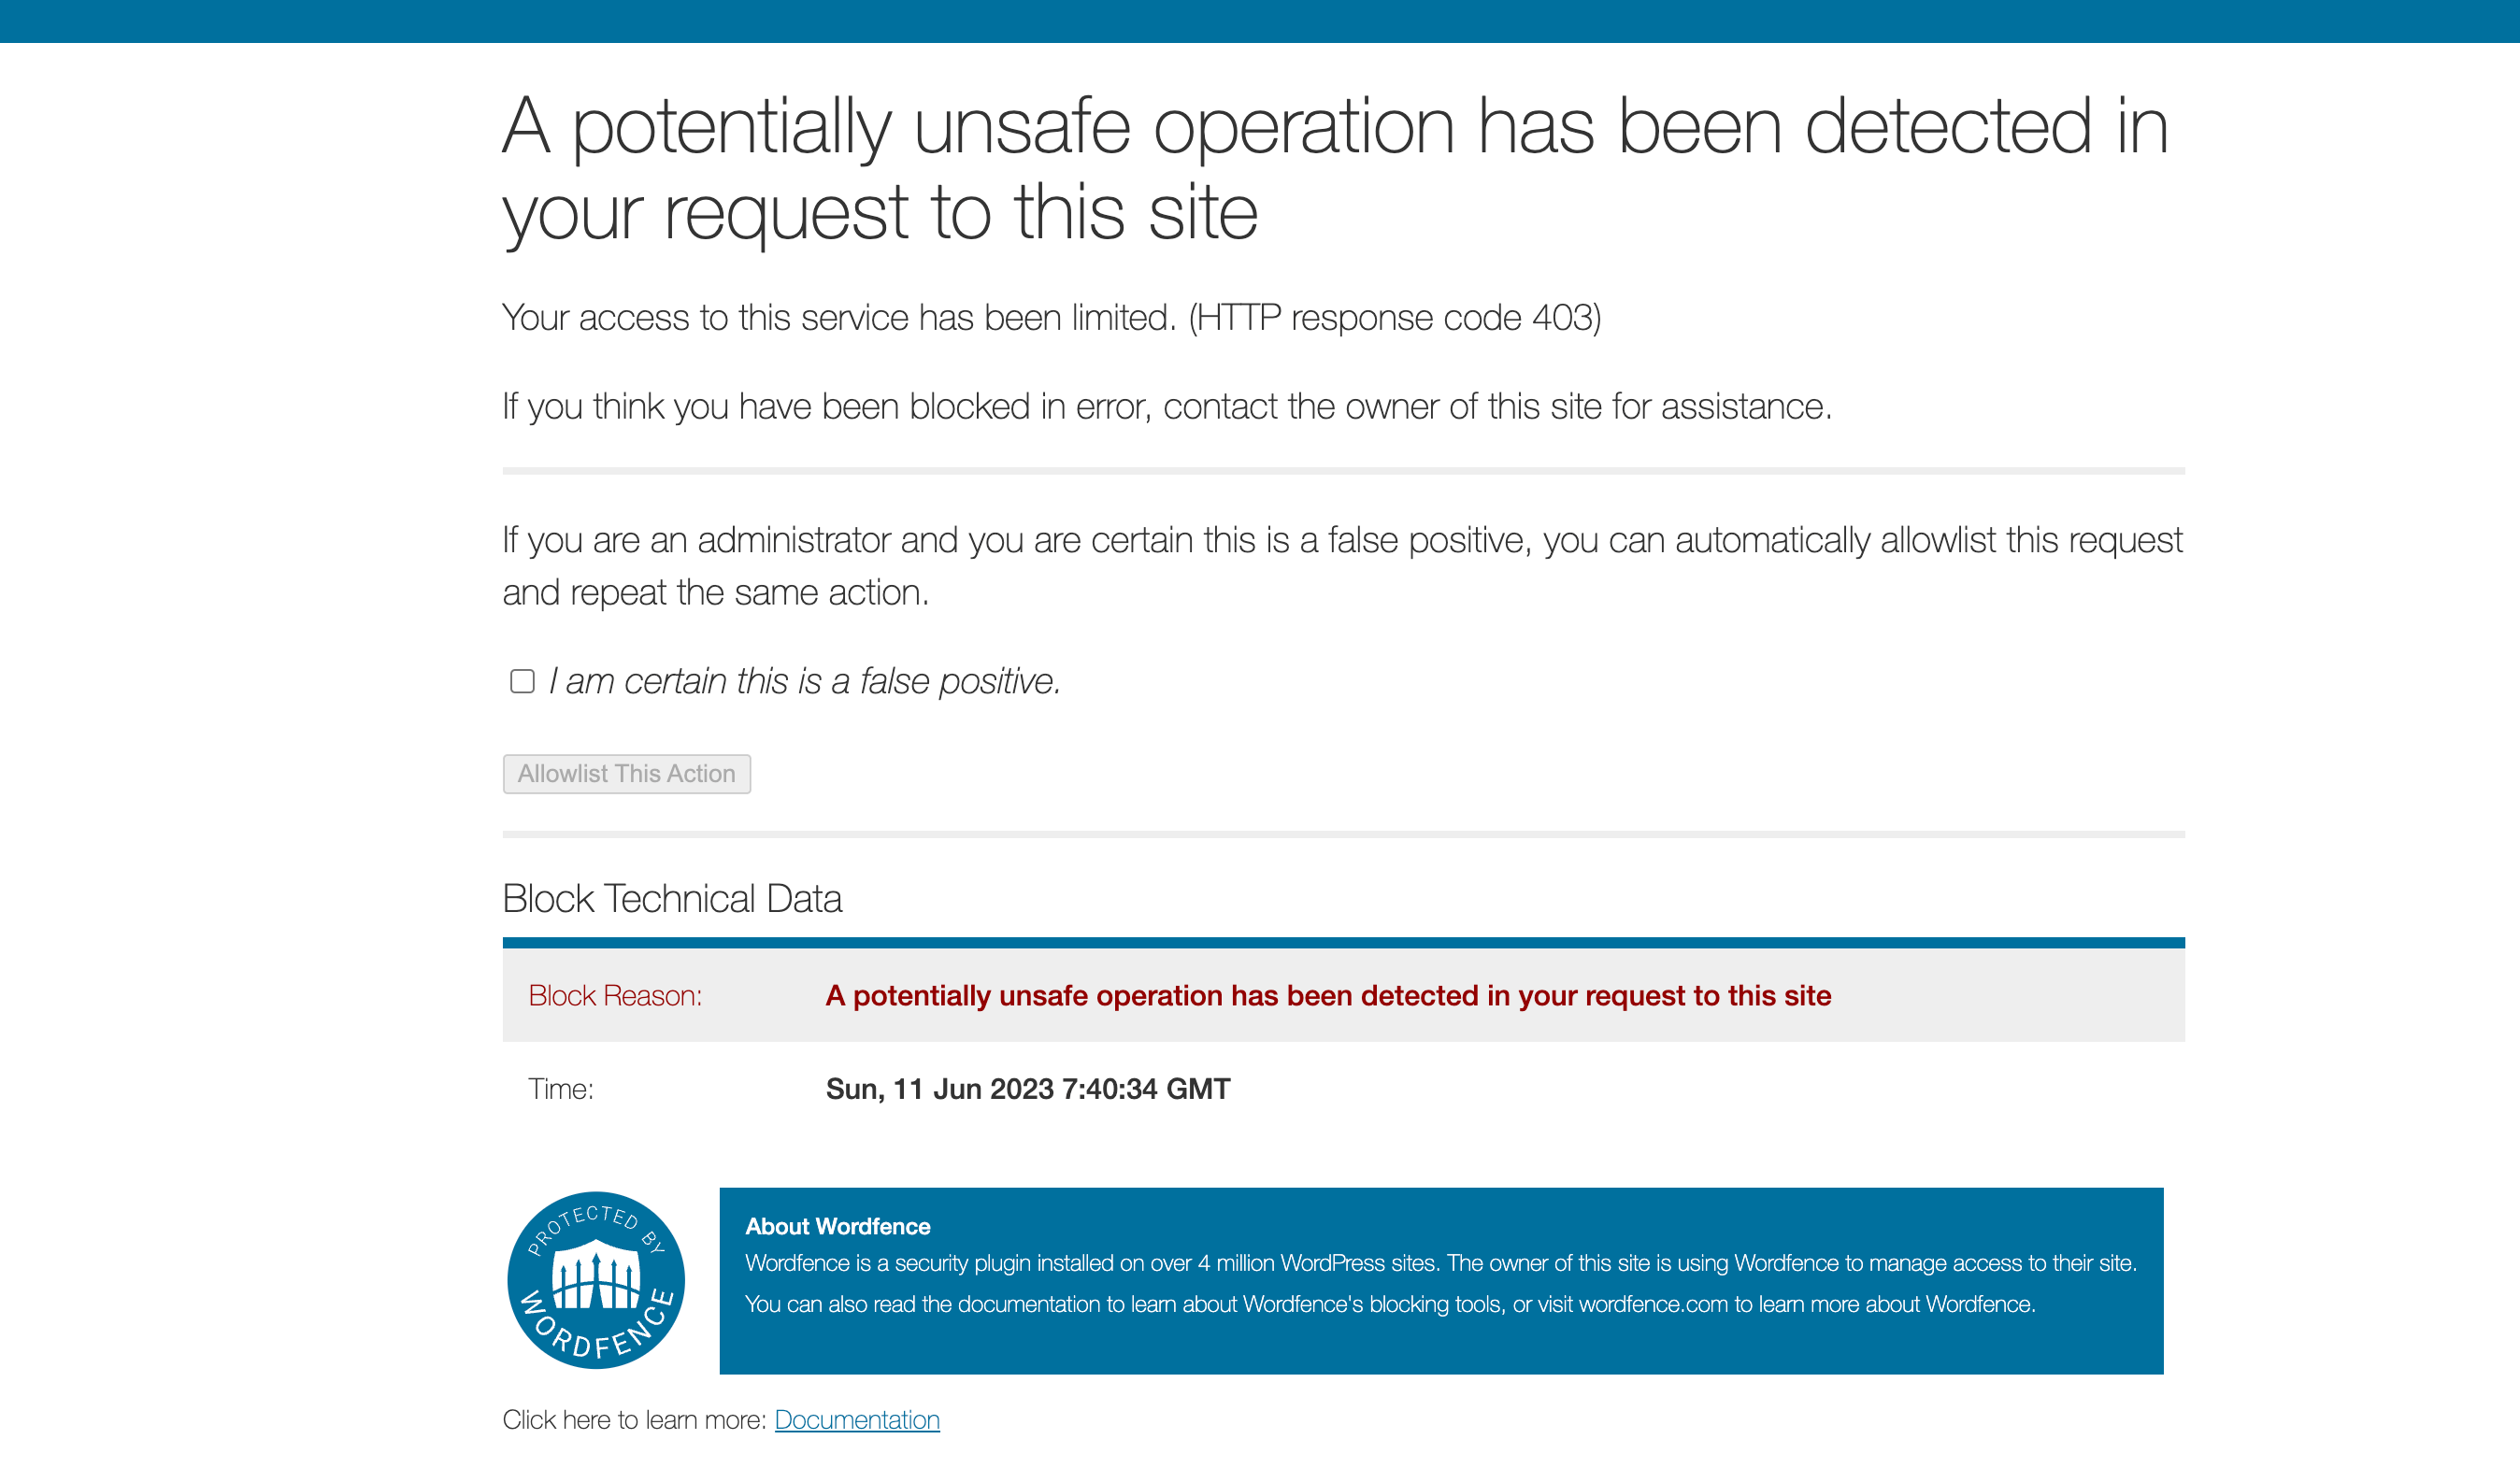 A potentially unsafe operation has been detected in your request to this siteの画面